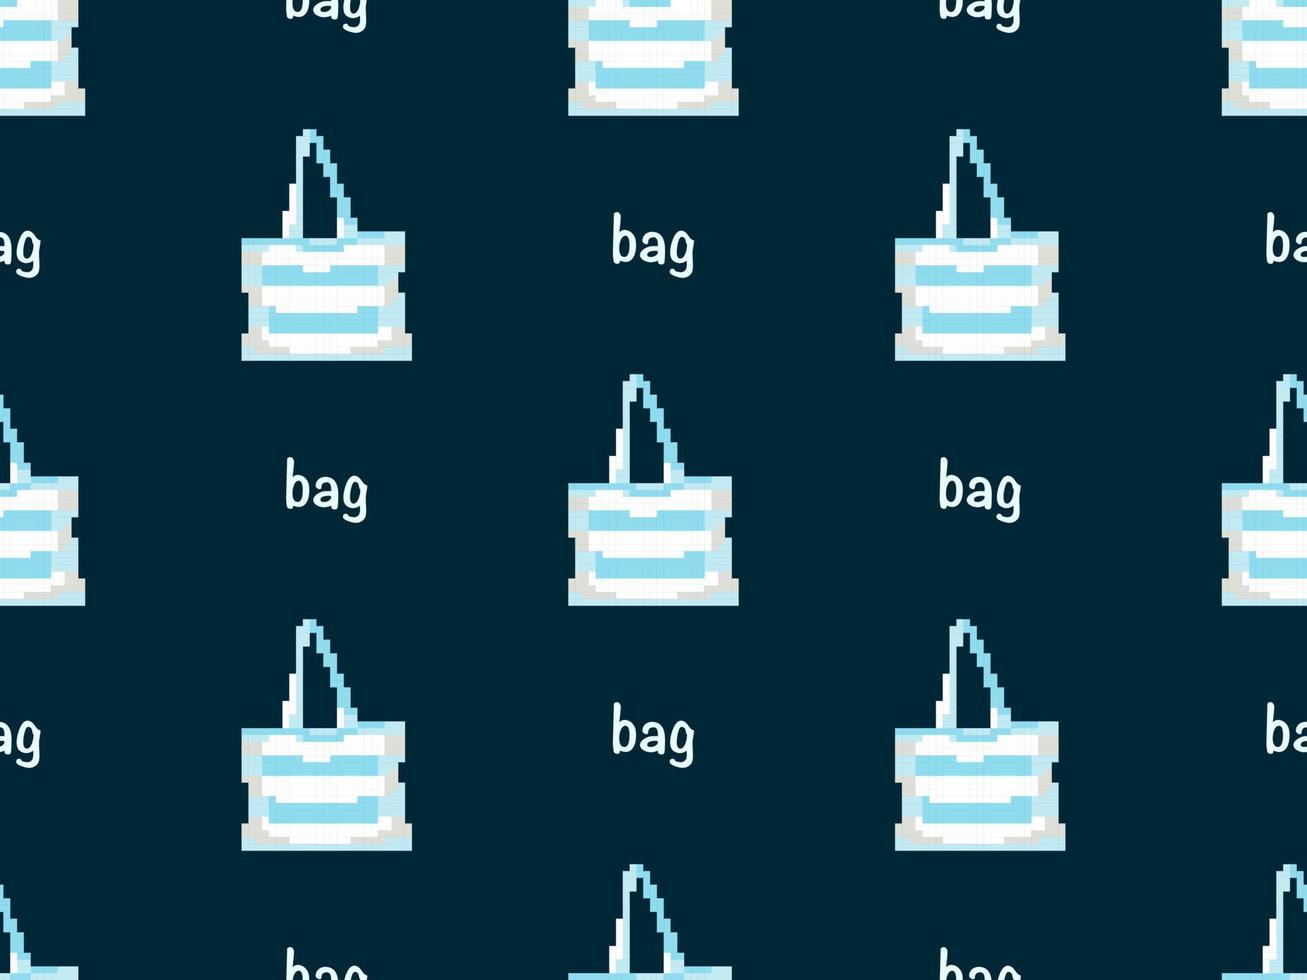 Bag cartoon character seamless pattern on blue background. Pixel style vector